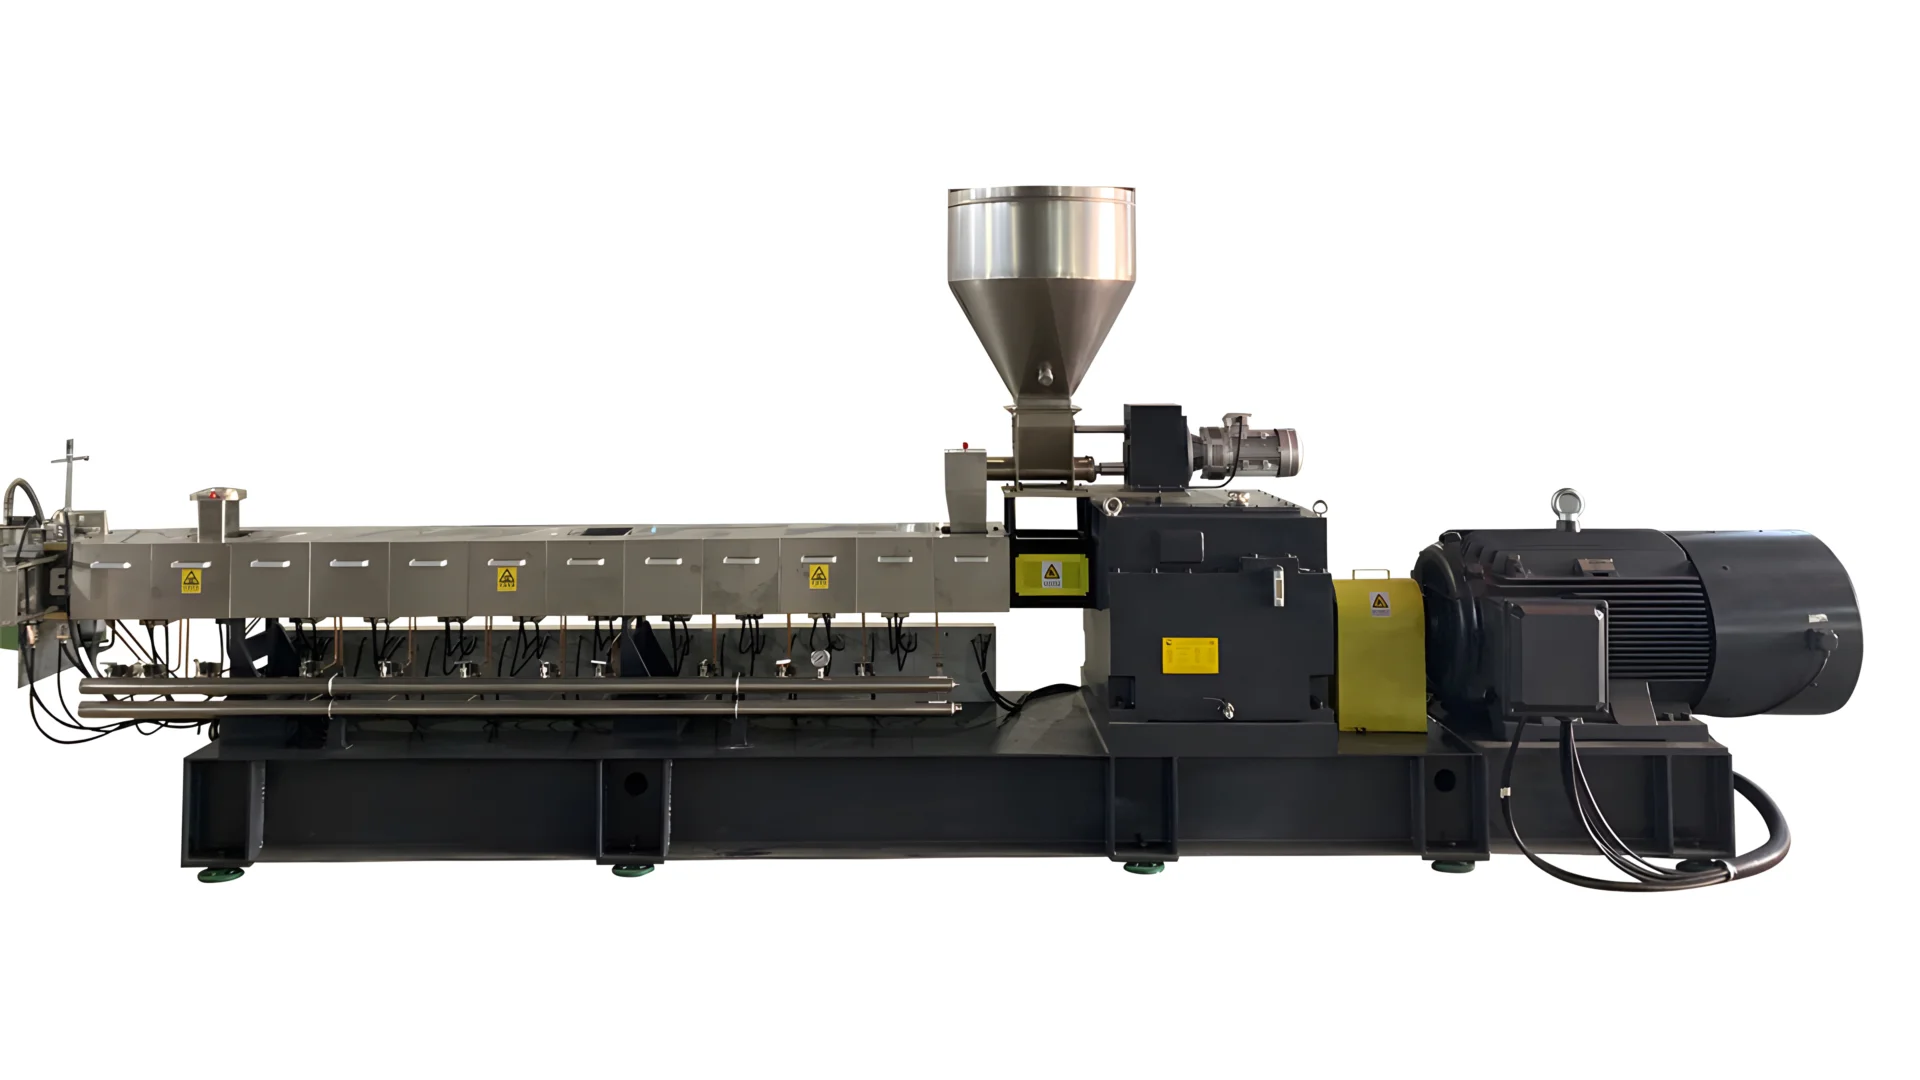 **Alt Text:** A high-performance co-rotating twin-screw extruder. The machine features a long, horizontal design with multiple heating zones, a large hopper for material feeding at the top, and a powerful motor at the end. The extruder is designed for efficient and consistent processing of various materials, making it ideal for industrial applications such as plastics compounding, blending, and recycling. The extruder's robust construction and advanced technology ensure high output and reliability.